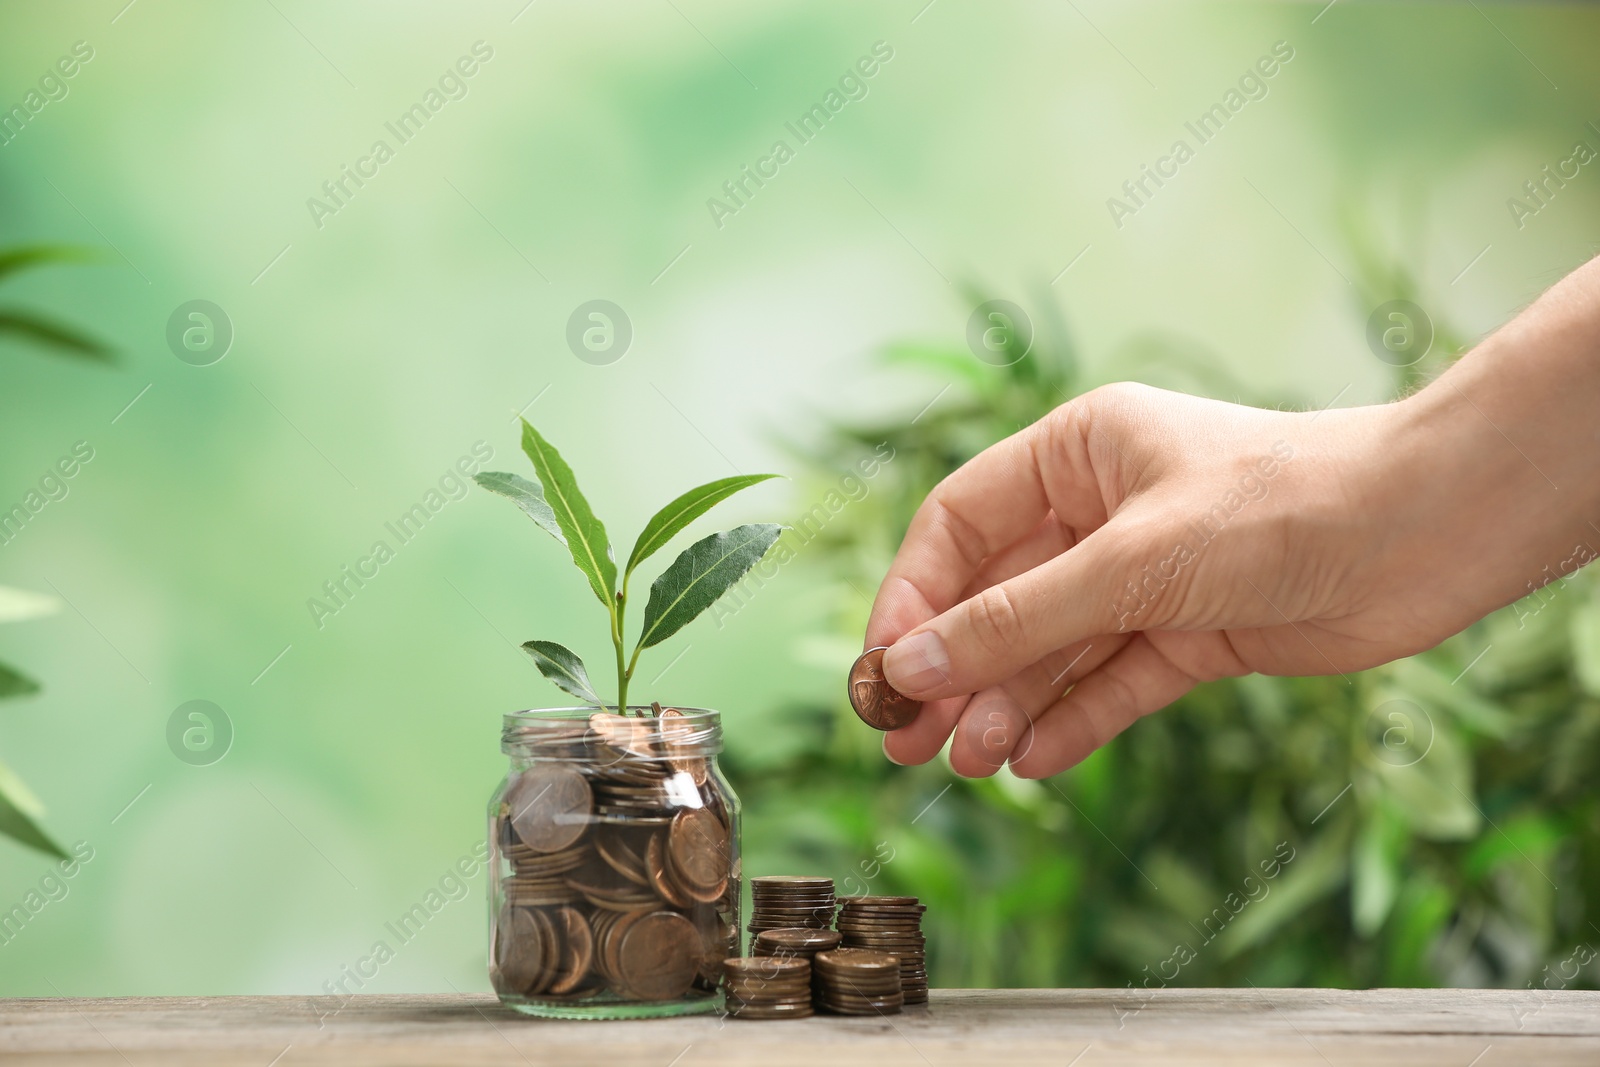 Photo of Woman putting coin onto pile, glass jar and green plant on wooden table against blurred background, closeup